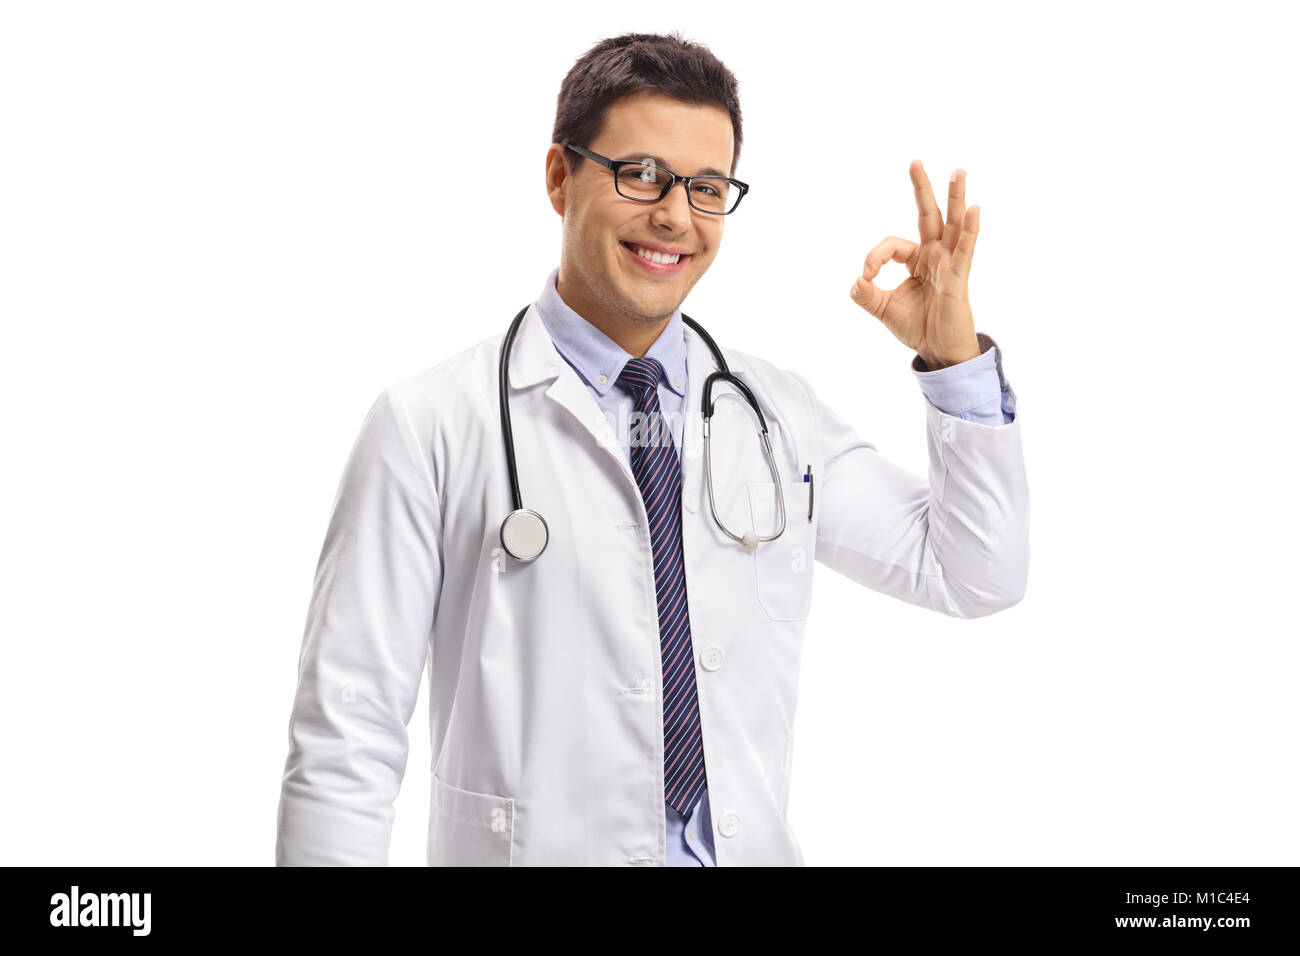 Doctor making an OK hand gesture isolated on white background Stock Photo